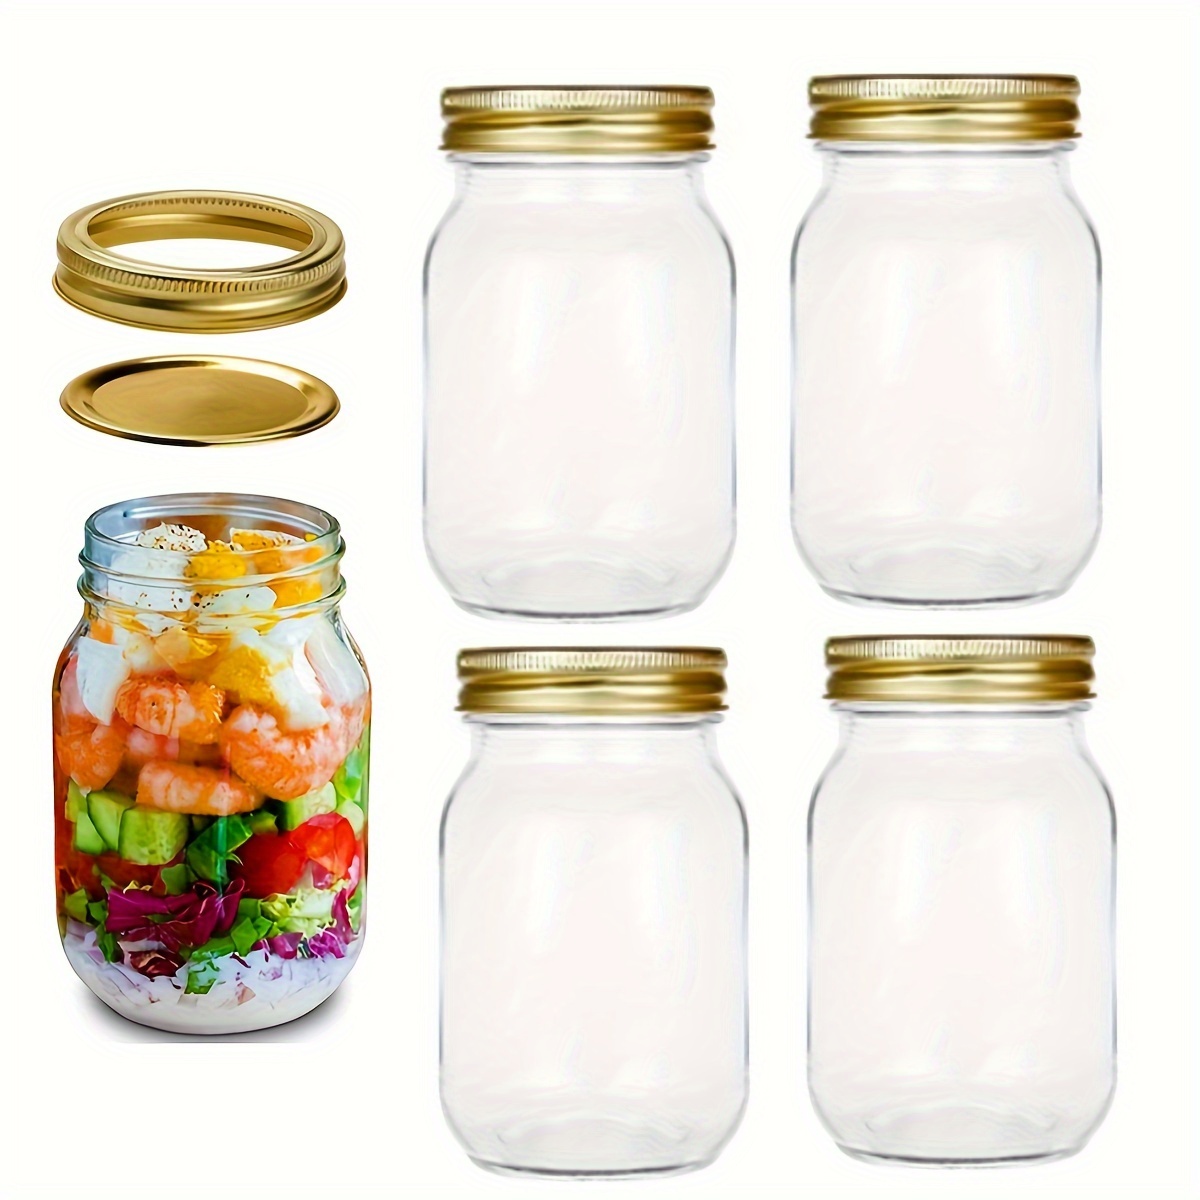 Mini Yogurt Jars 30 Pack, 7 oz Glass Favor Jars with Cork Lids, Pudding  Containers with Lids, Mason Jar Wedding Favors Honey Pot with Label Tags  and String 